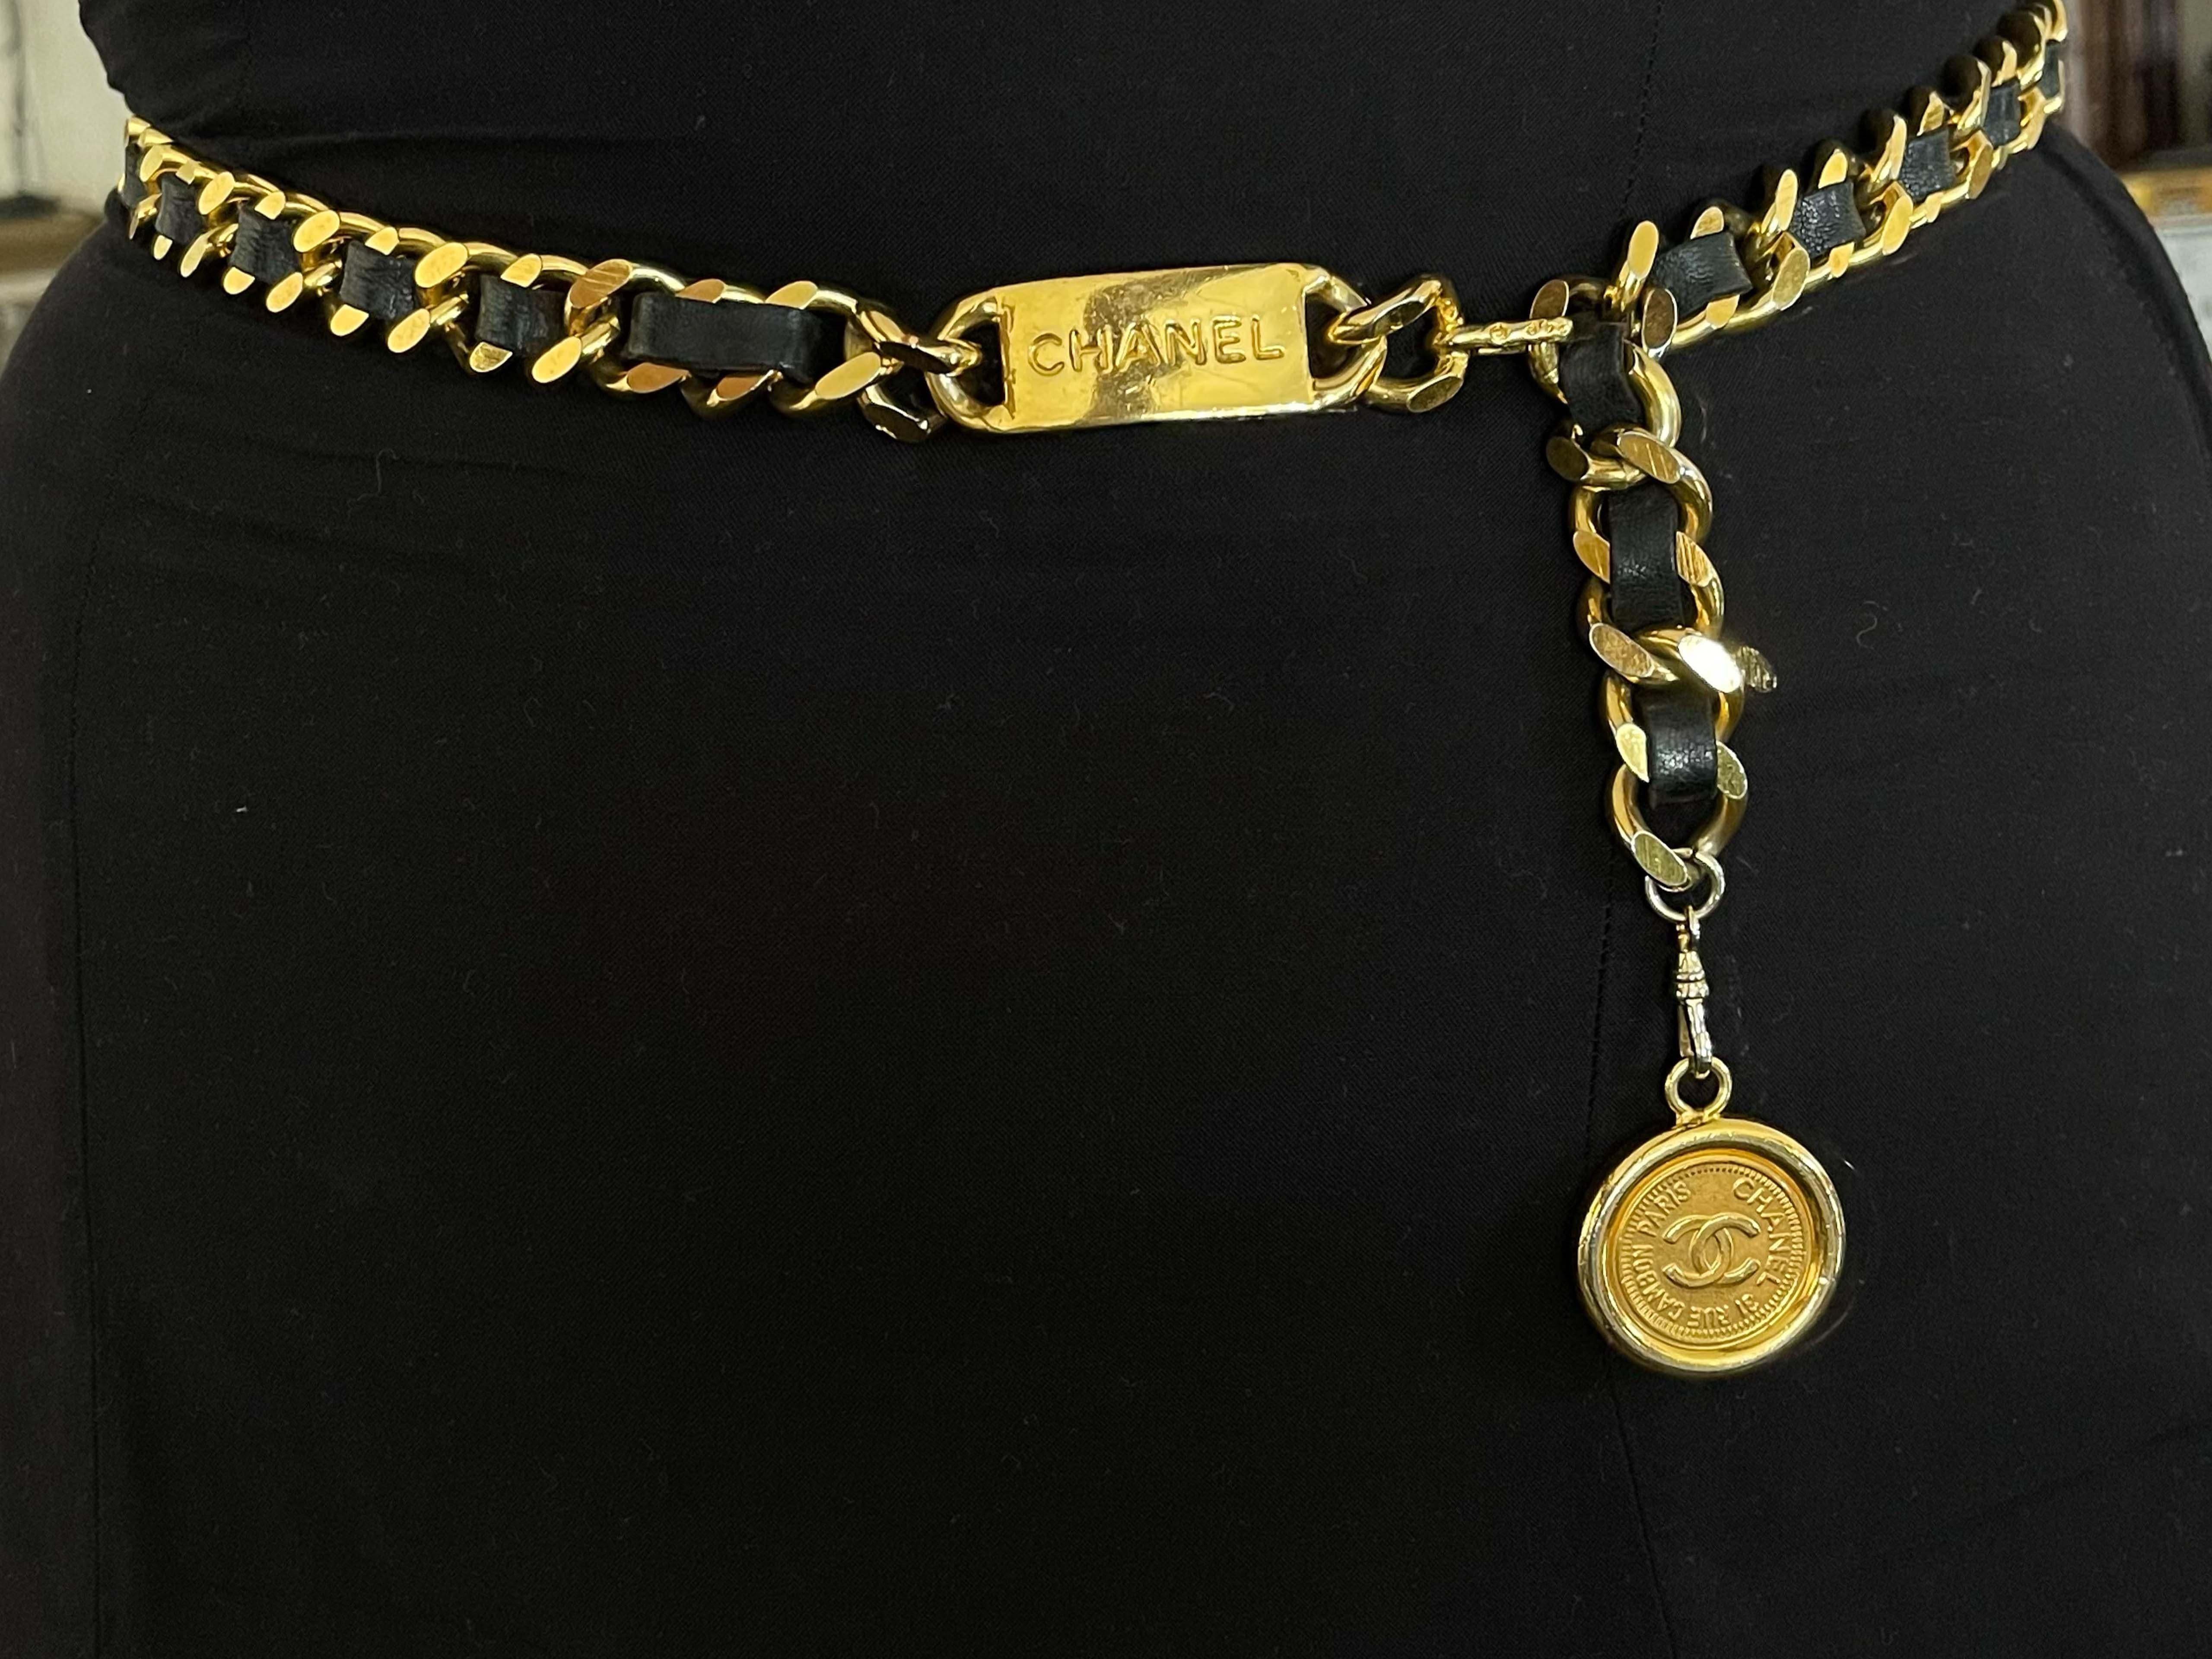 Classic and chic, this vintage Chanel chain leather belt is crafted in gold-plated metal, accented with a 'CC' logo-engraved medallion pendant. Closure can be hooked on multiple links for a variety of fits.

Brooch Specifications:

Designer: